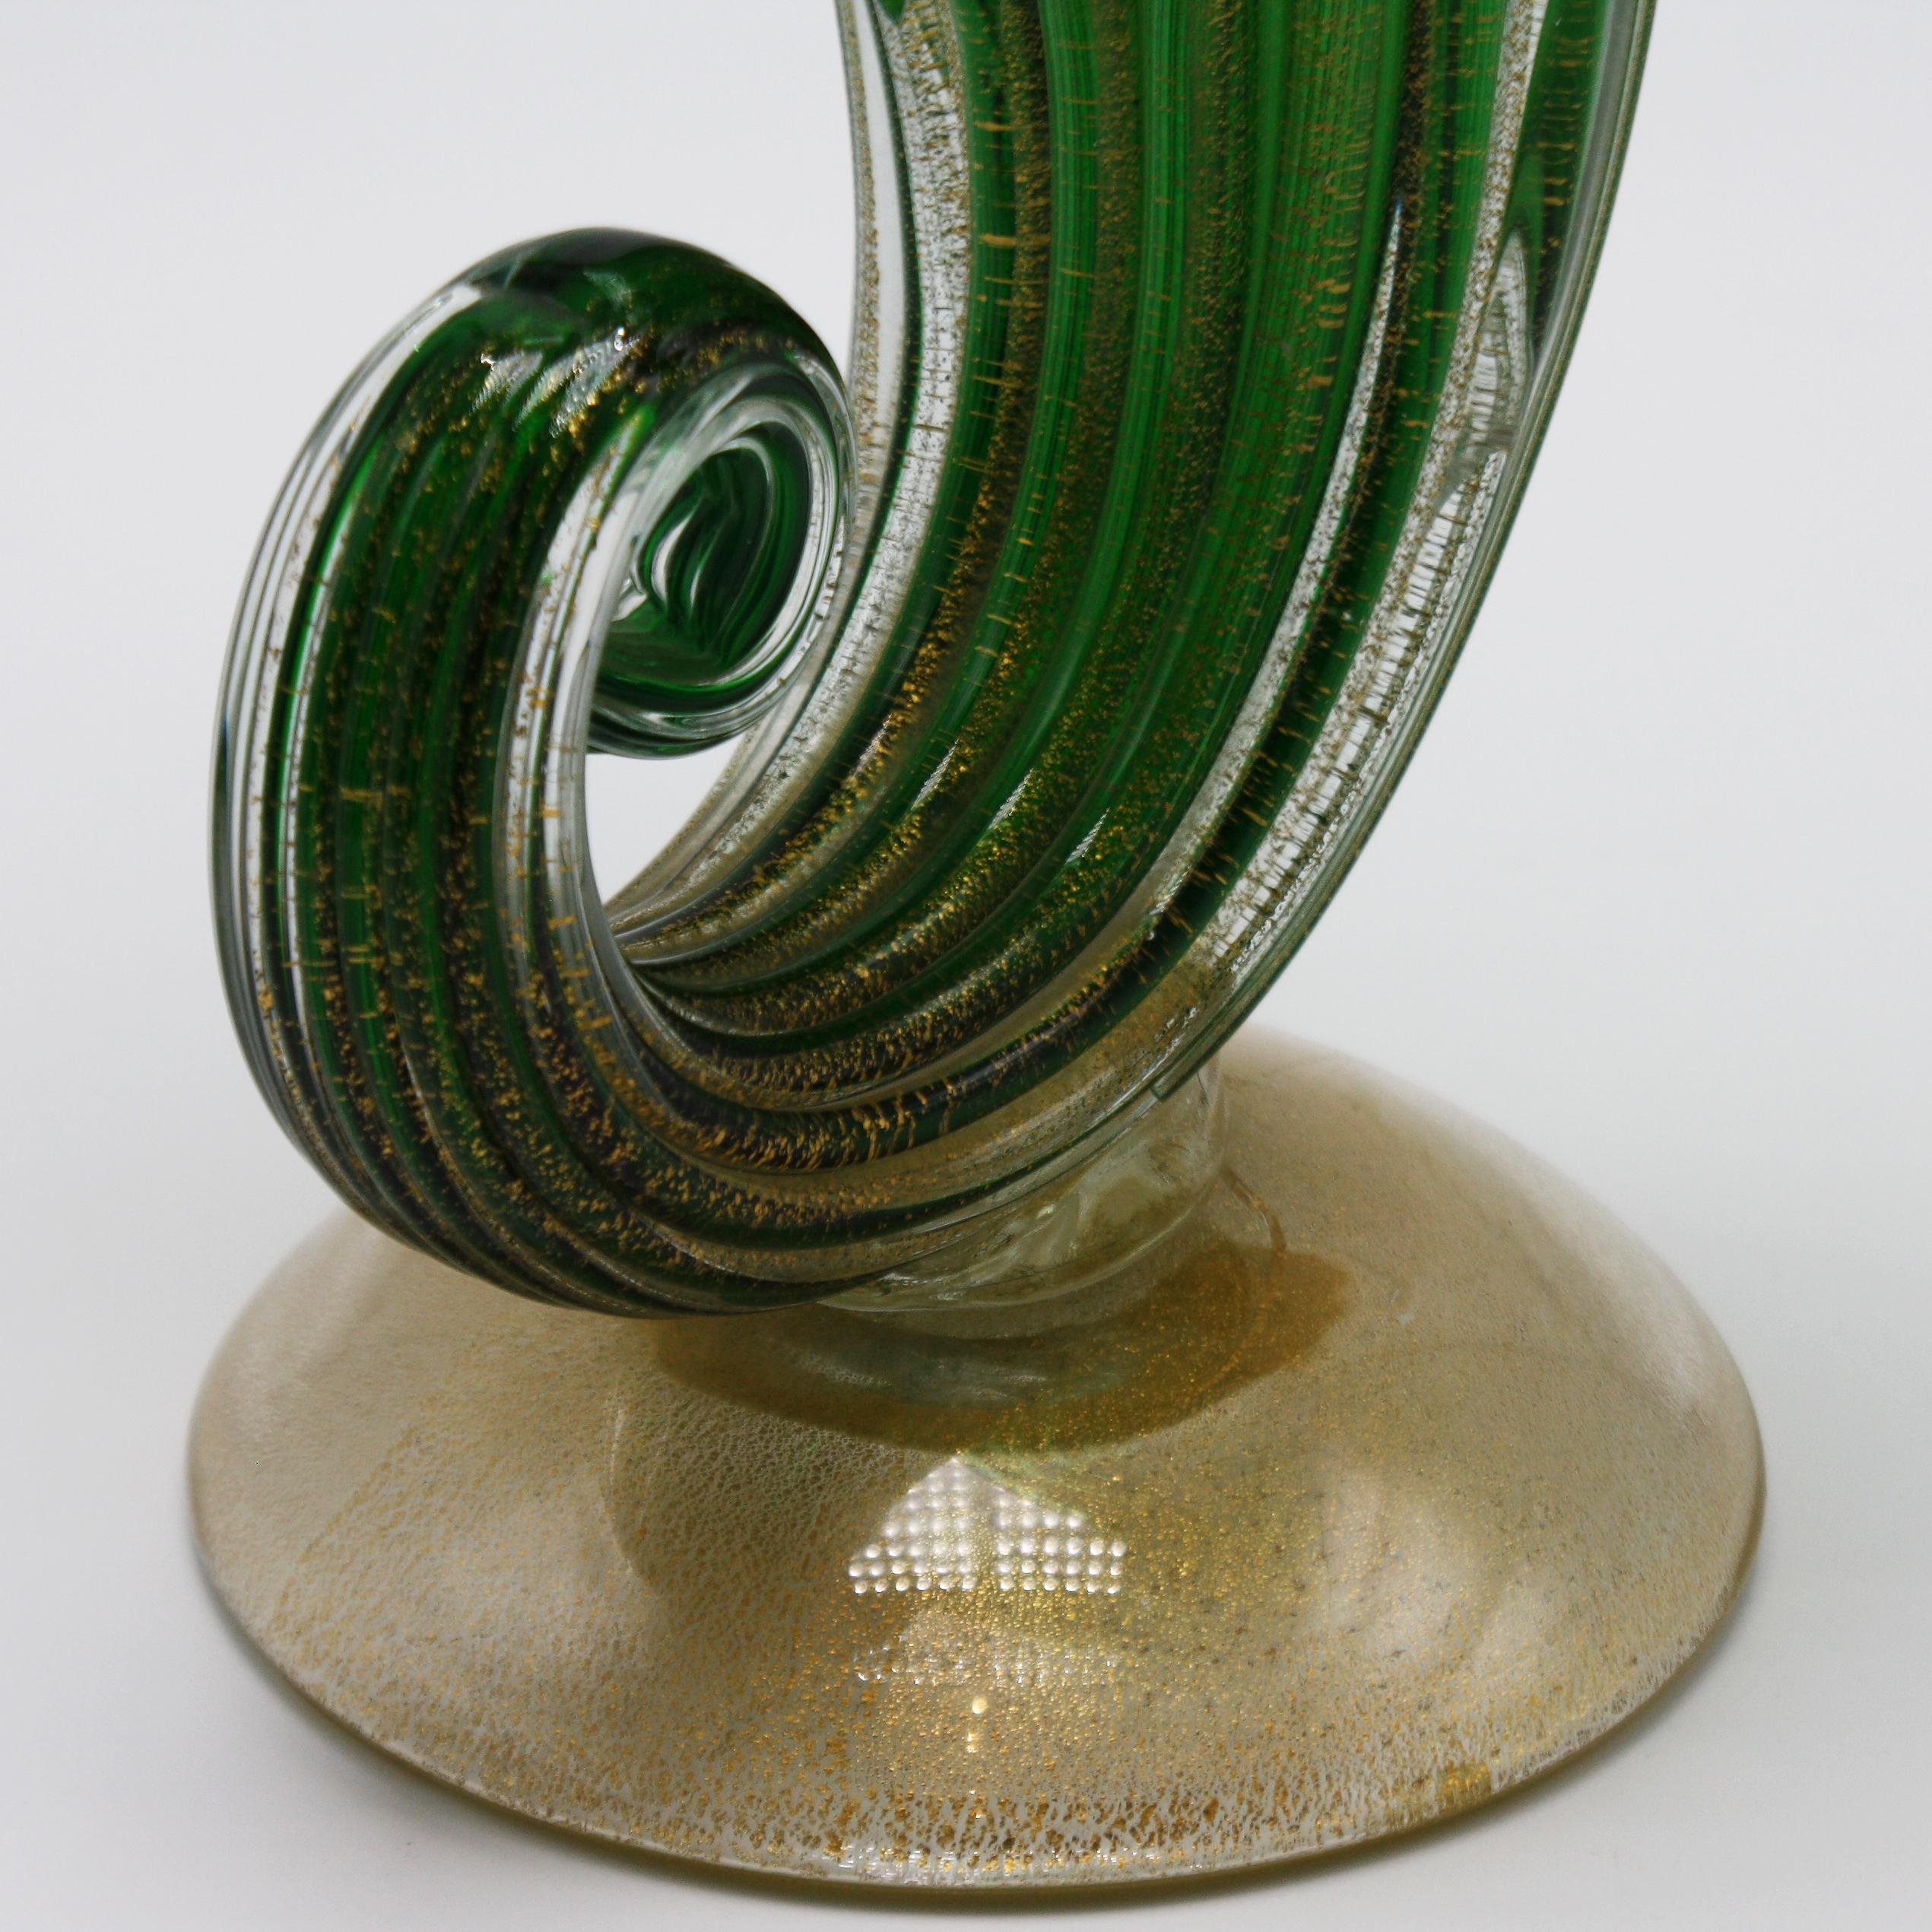 Murano Glass Archimede Seguso Jack-in-the-Pulpit Vase with 24-Karat Gold Inclusions